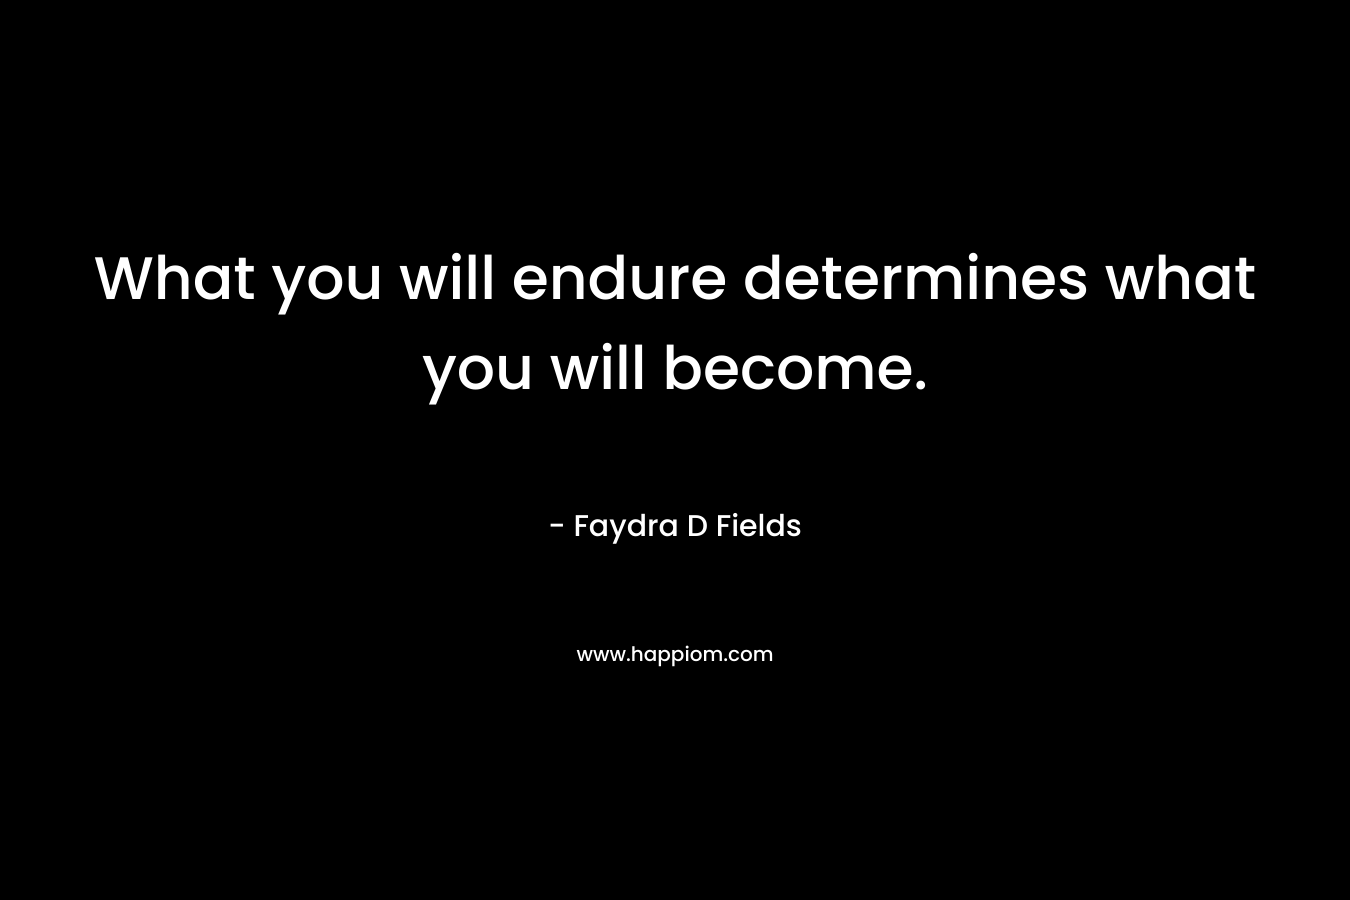 What you will endure determines what you will become. – Faydra D Fields